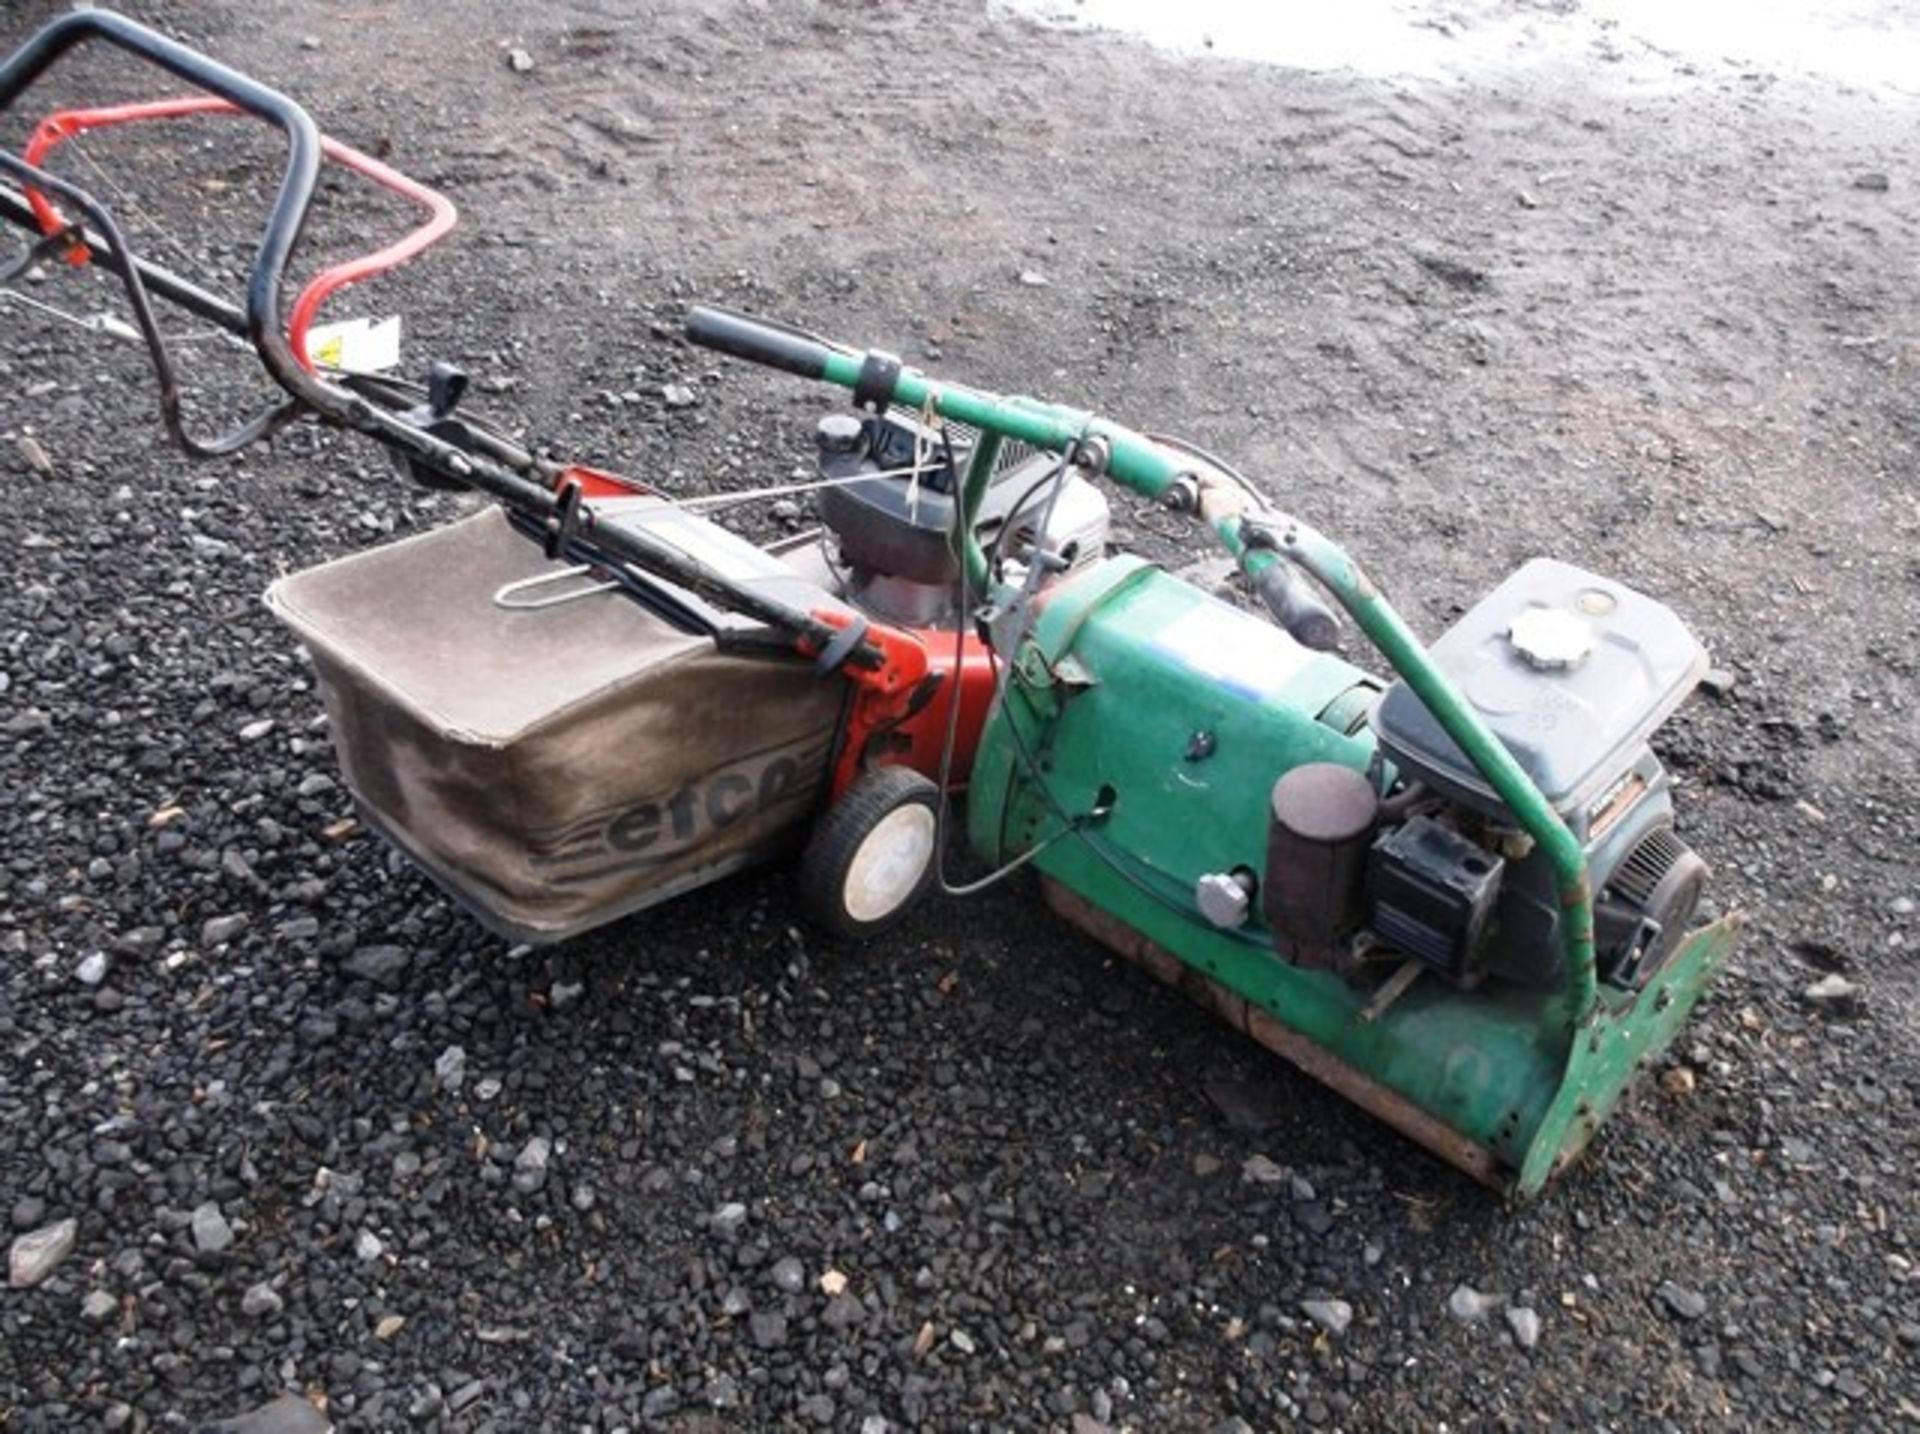 1 X RANSOMES MARQUIS 61 CYLINDER MOWER & 1 X EFCO ROTARY MOWER**DIRECT FROM HISTORIC SCOTLAND** - Image 3 of 3